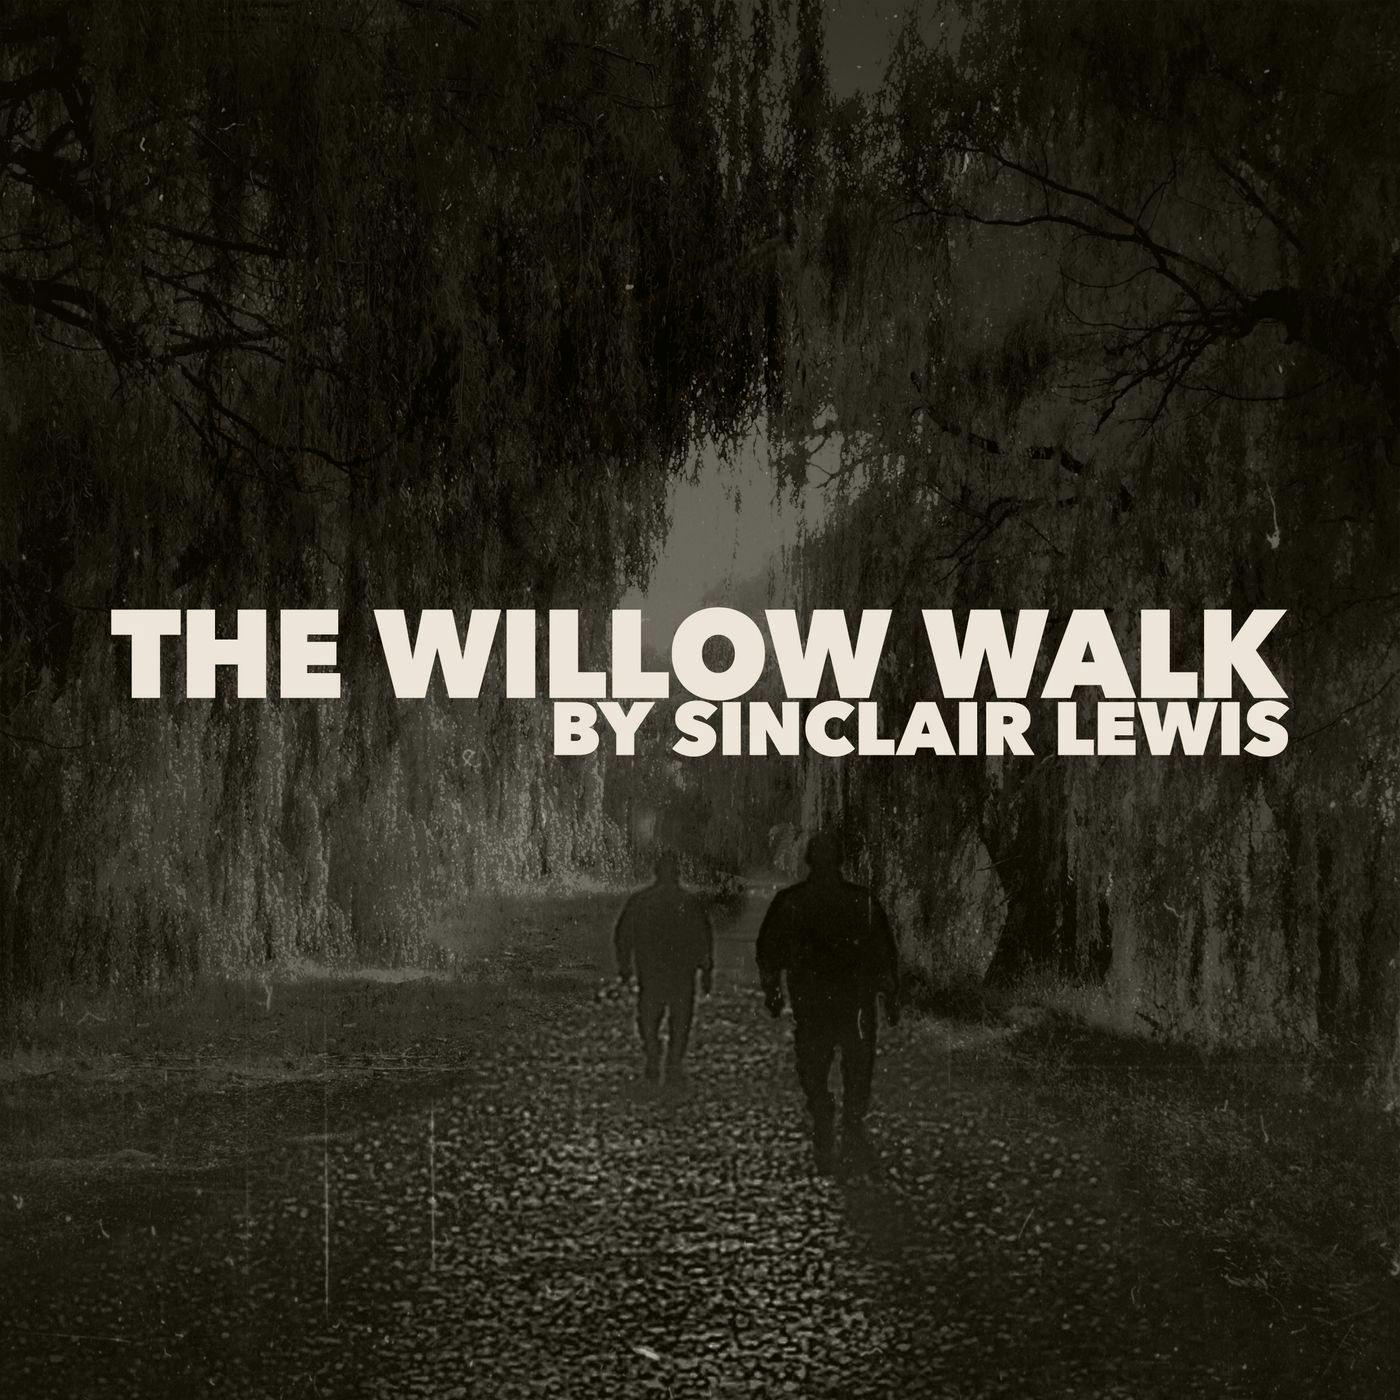 The Willow Walk by Sinclair Lewis